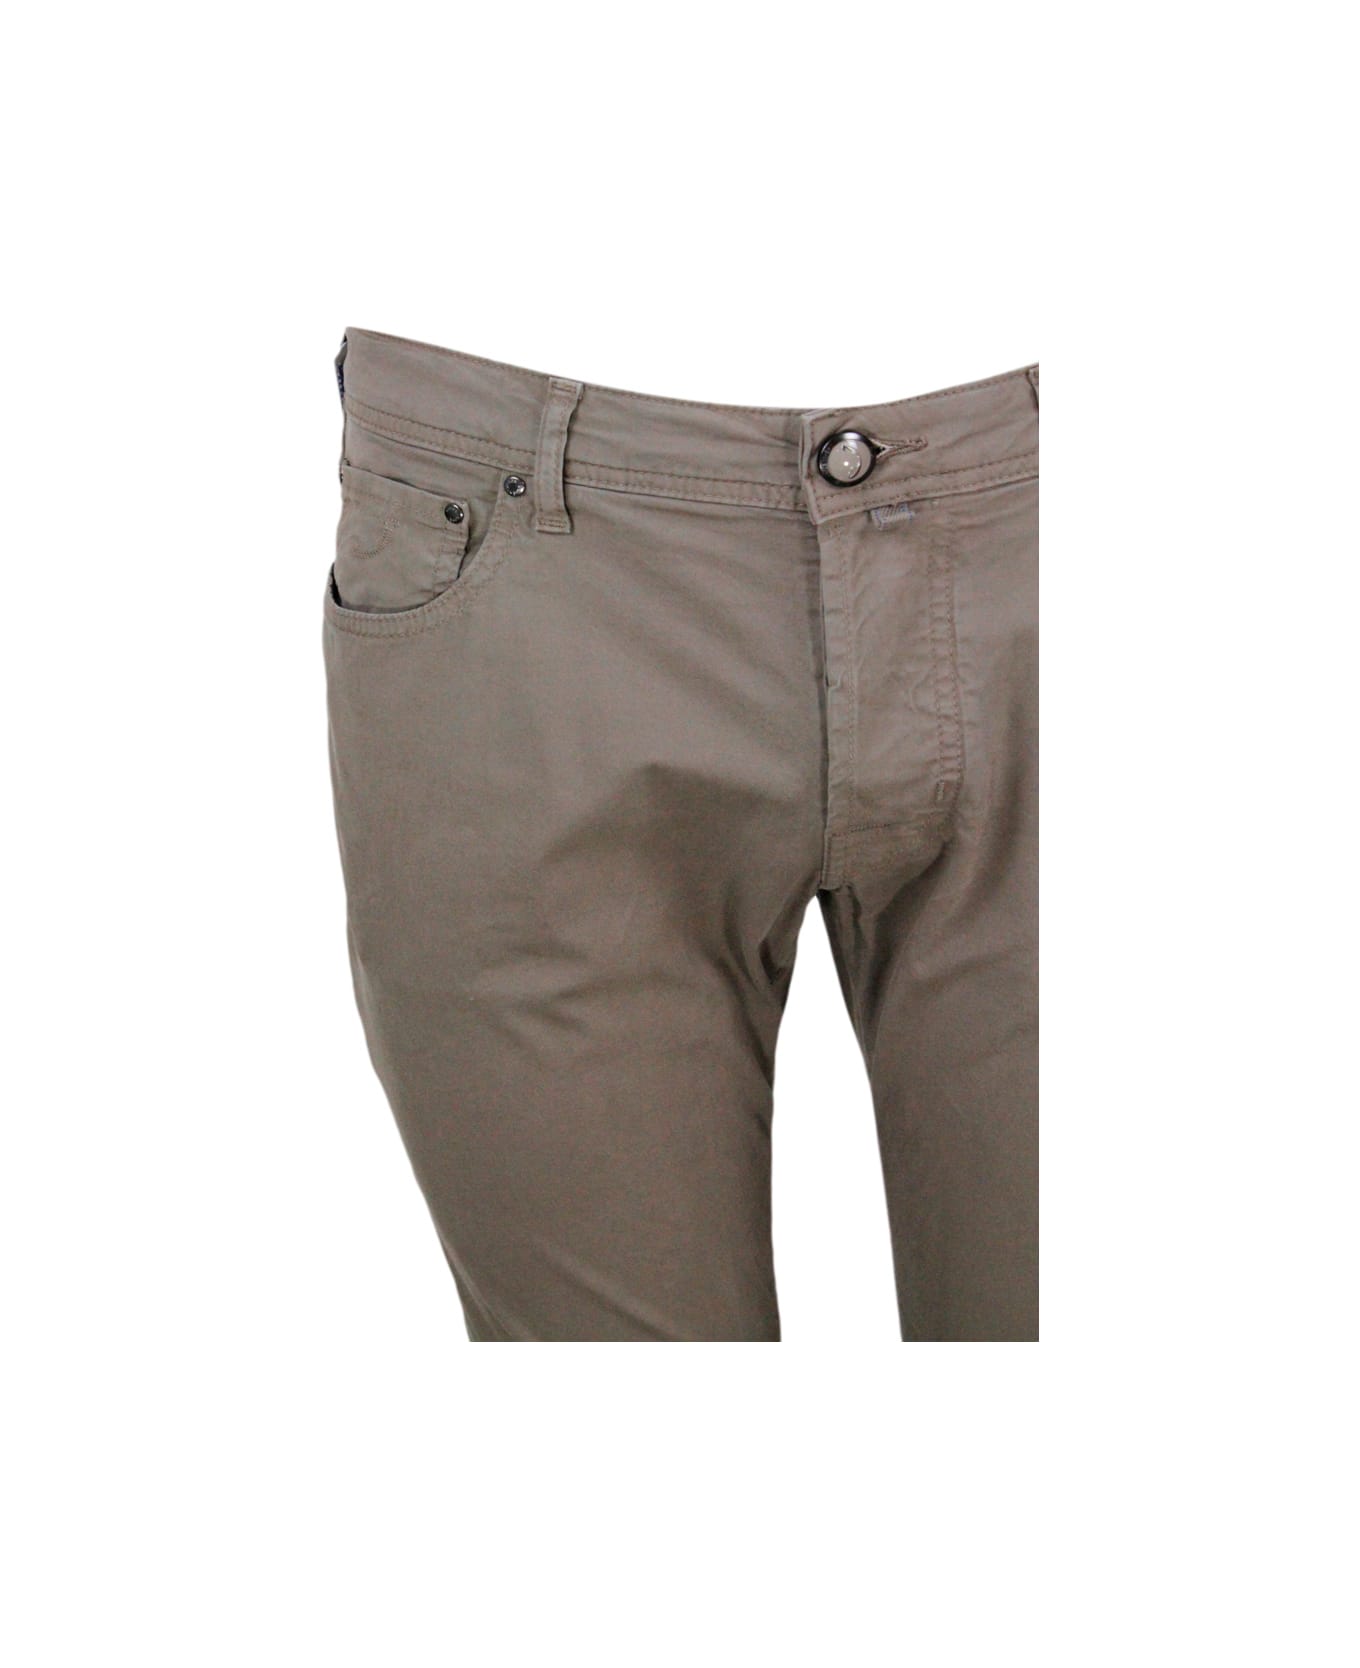 Jacob Cohen Bard J688 Luxury Edition Trousers In Soft Stretch Cotton With 5 Pockets With Closure Buttons And Lacquered Button And Pony Skin Tag With Logo - Taupe